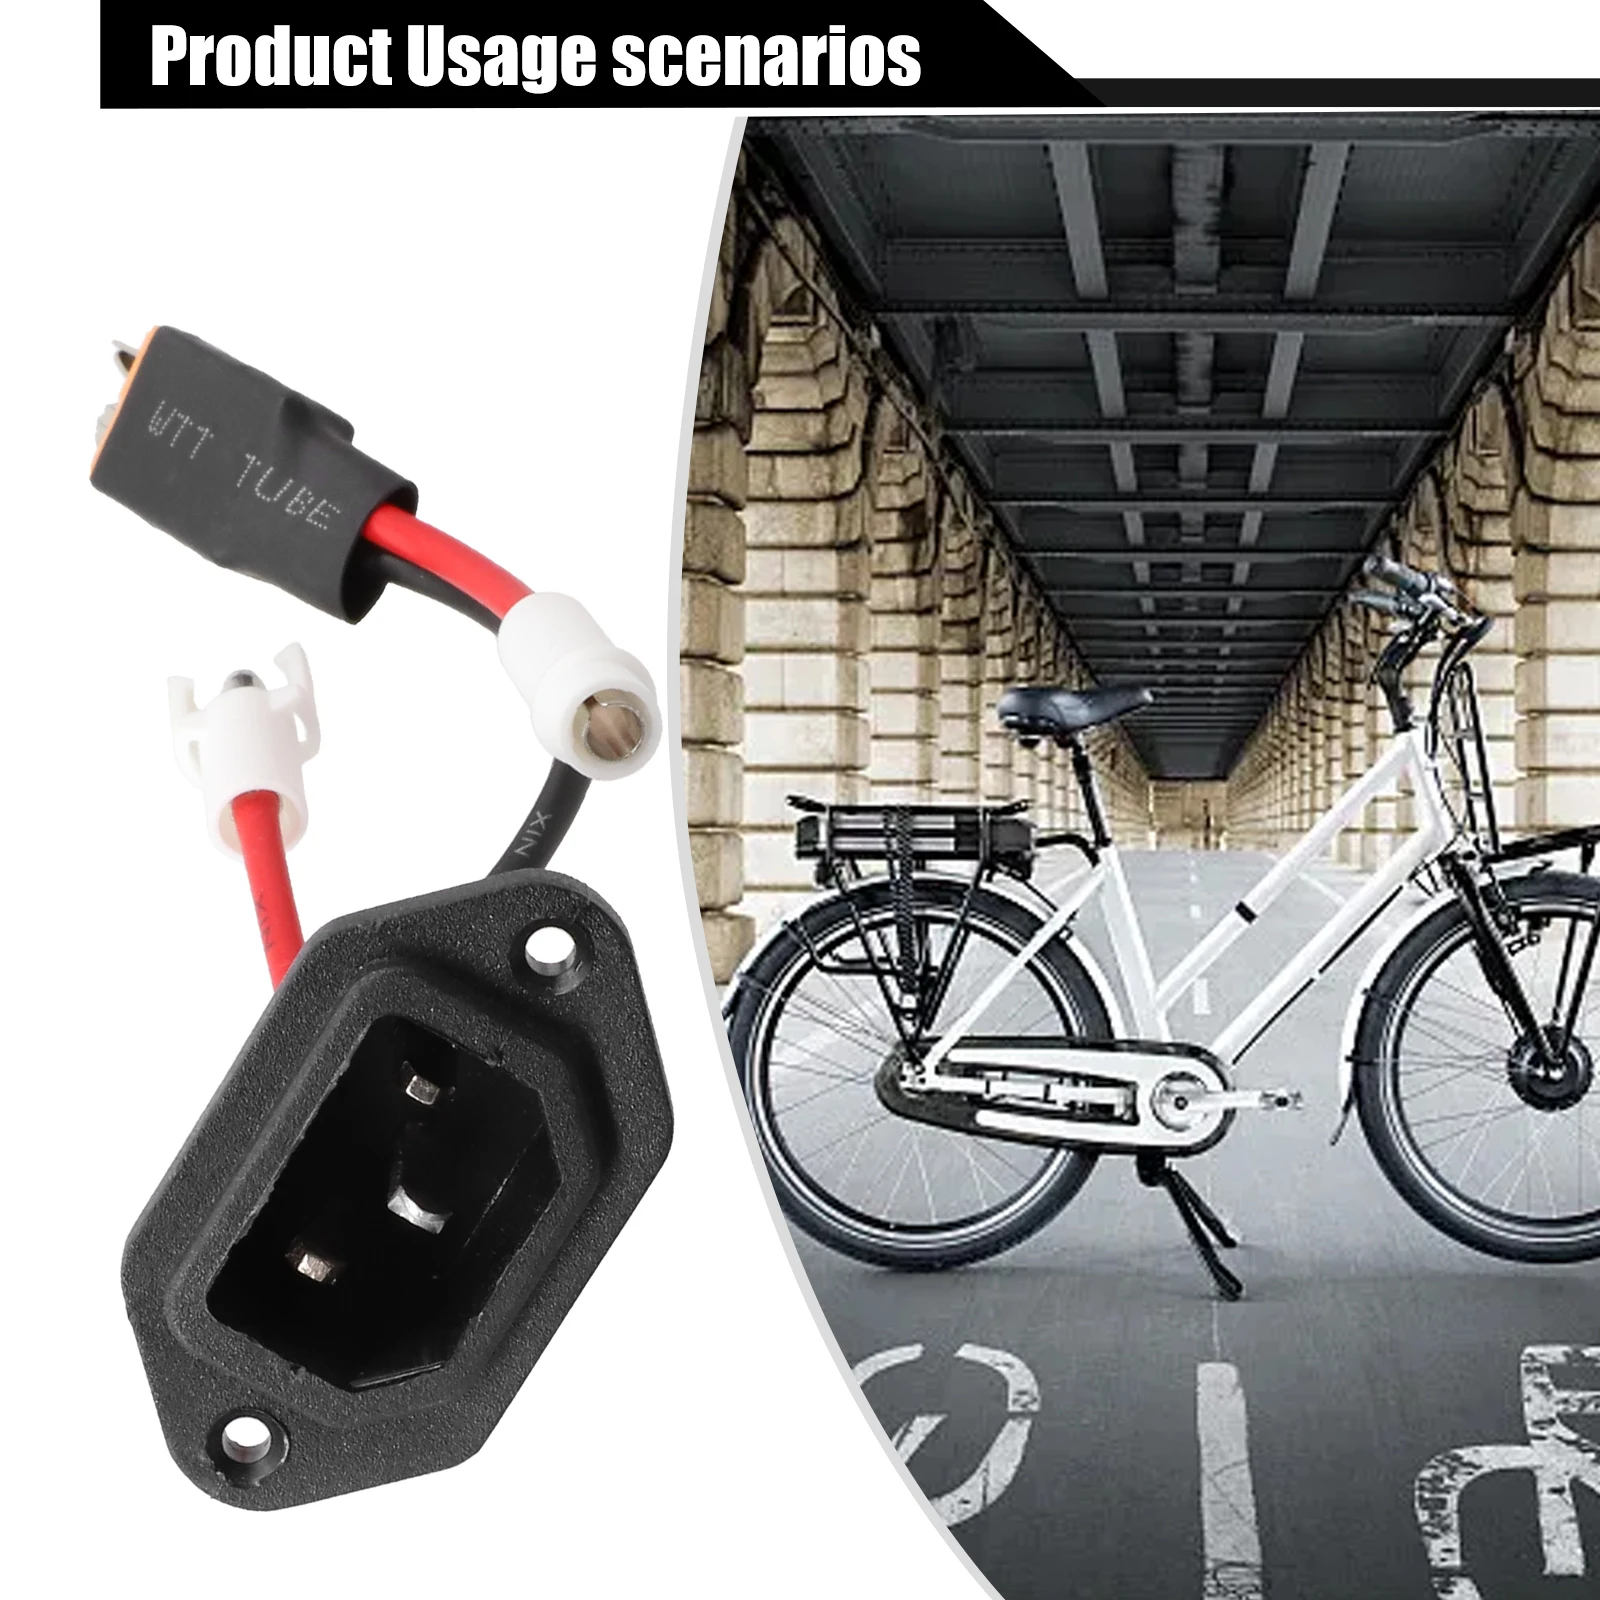 

Electric Scooter Ebike Charging Port DC2.5/Con/Female/Male/Lotus Charger Hole Socket 20cm Line PVC Electric Bike Accessories